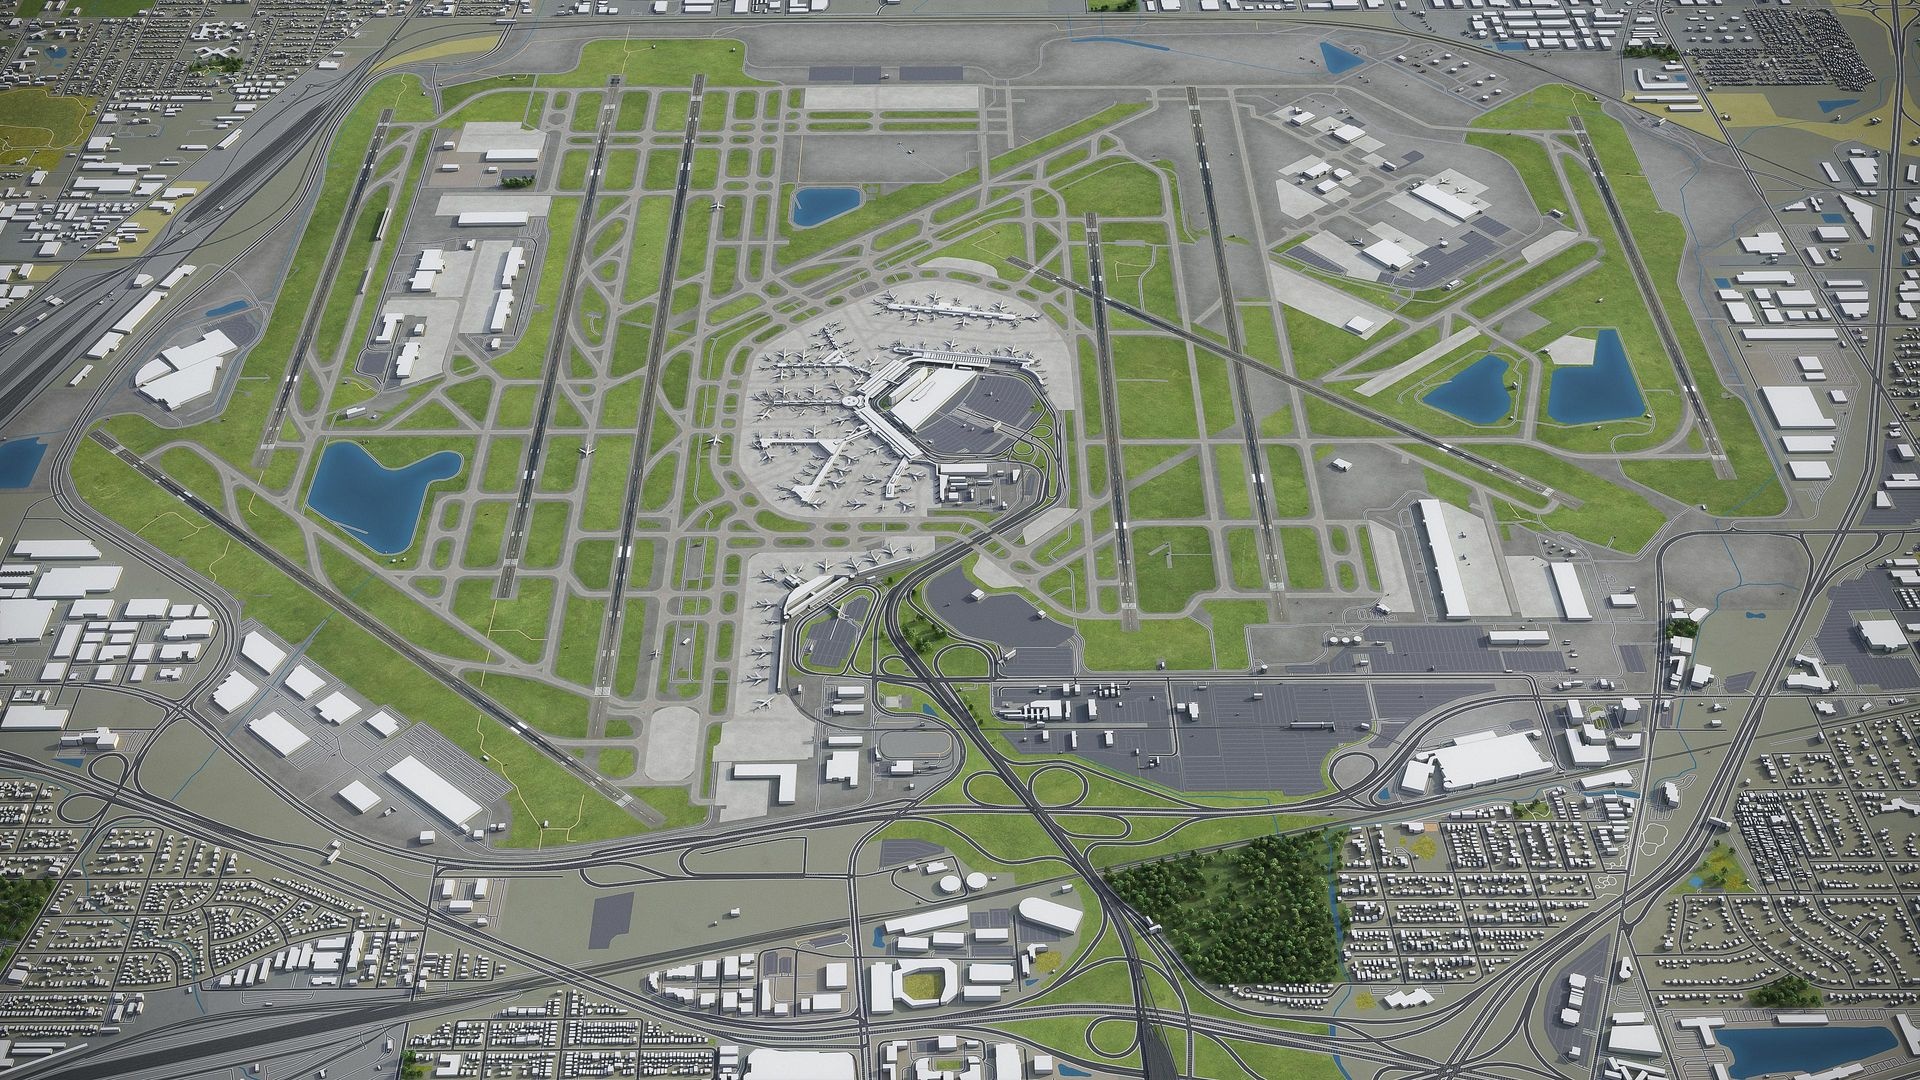 Chicago O'Hare Airport, ORD 3D model, 3Dcitymodels, 1920x1080 Full HD Desktop